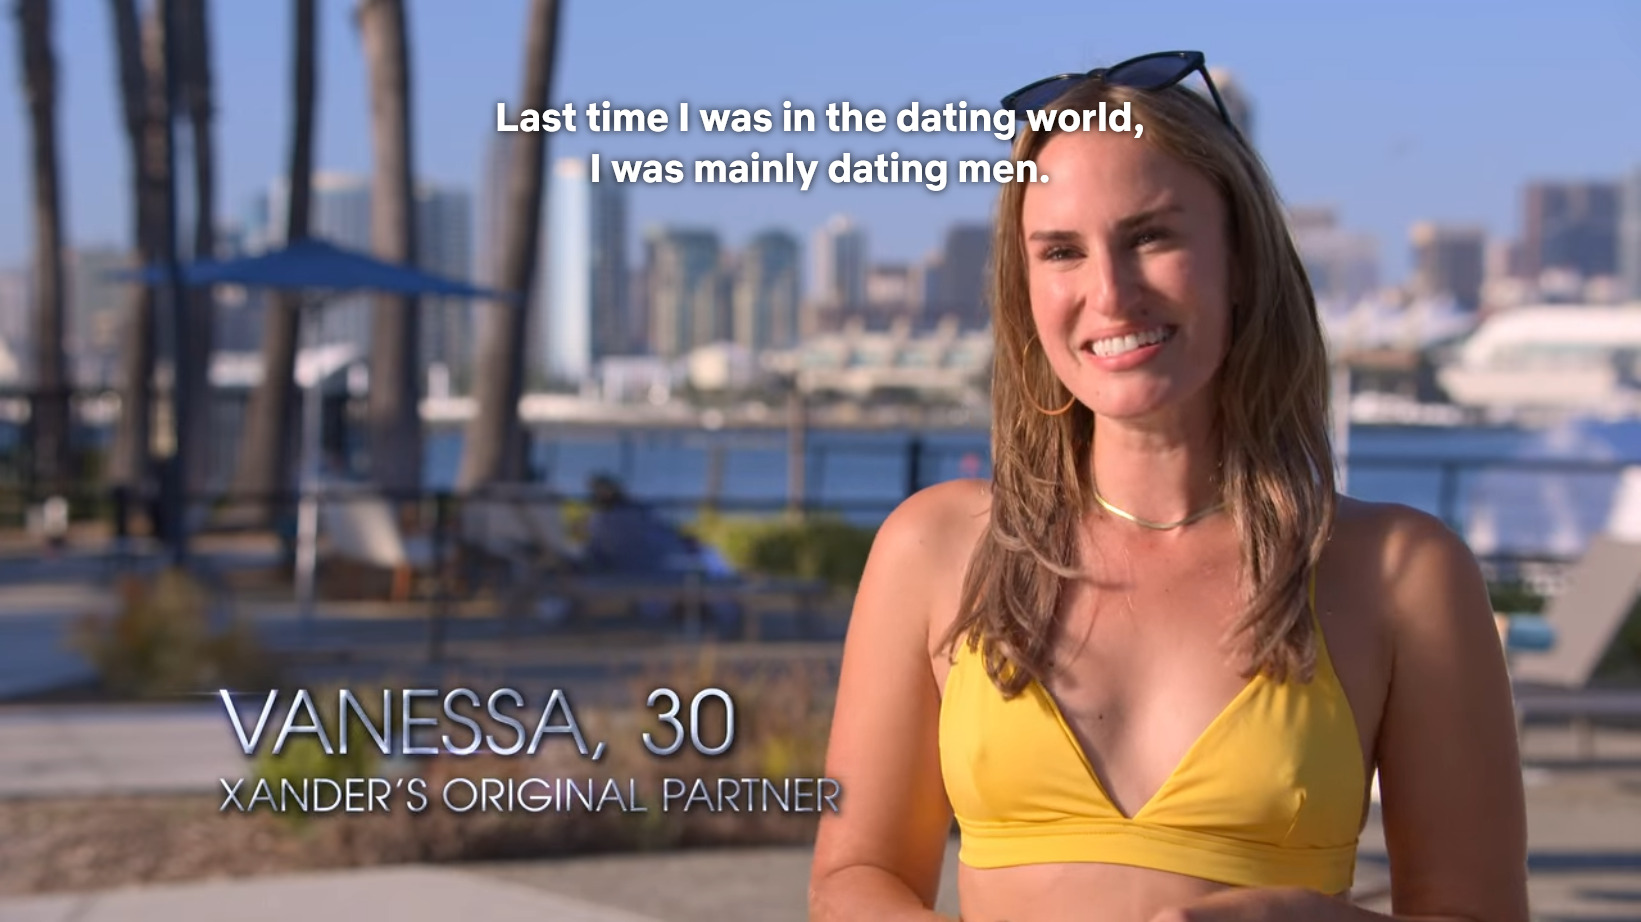 Vanessa stands by the pool and says "Last time I was in the dating world, I was mainly dating men."